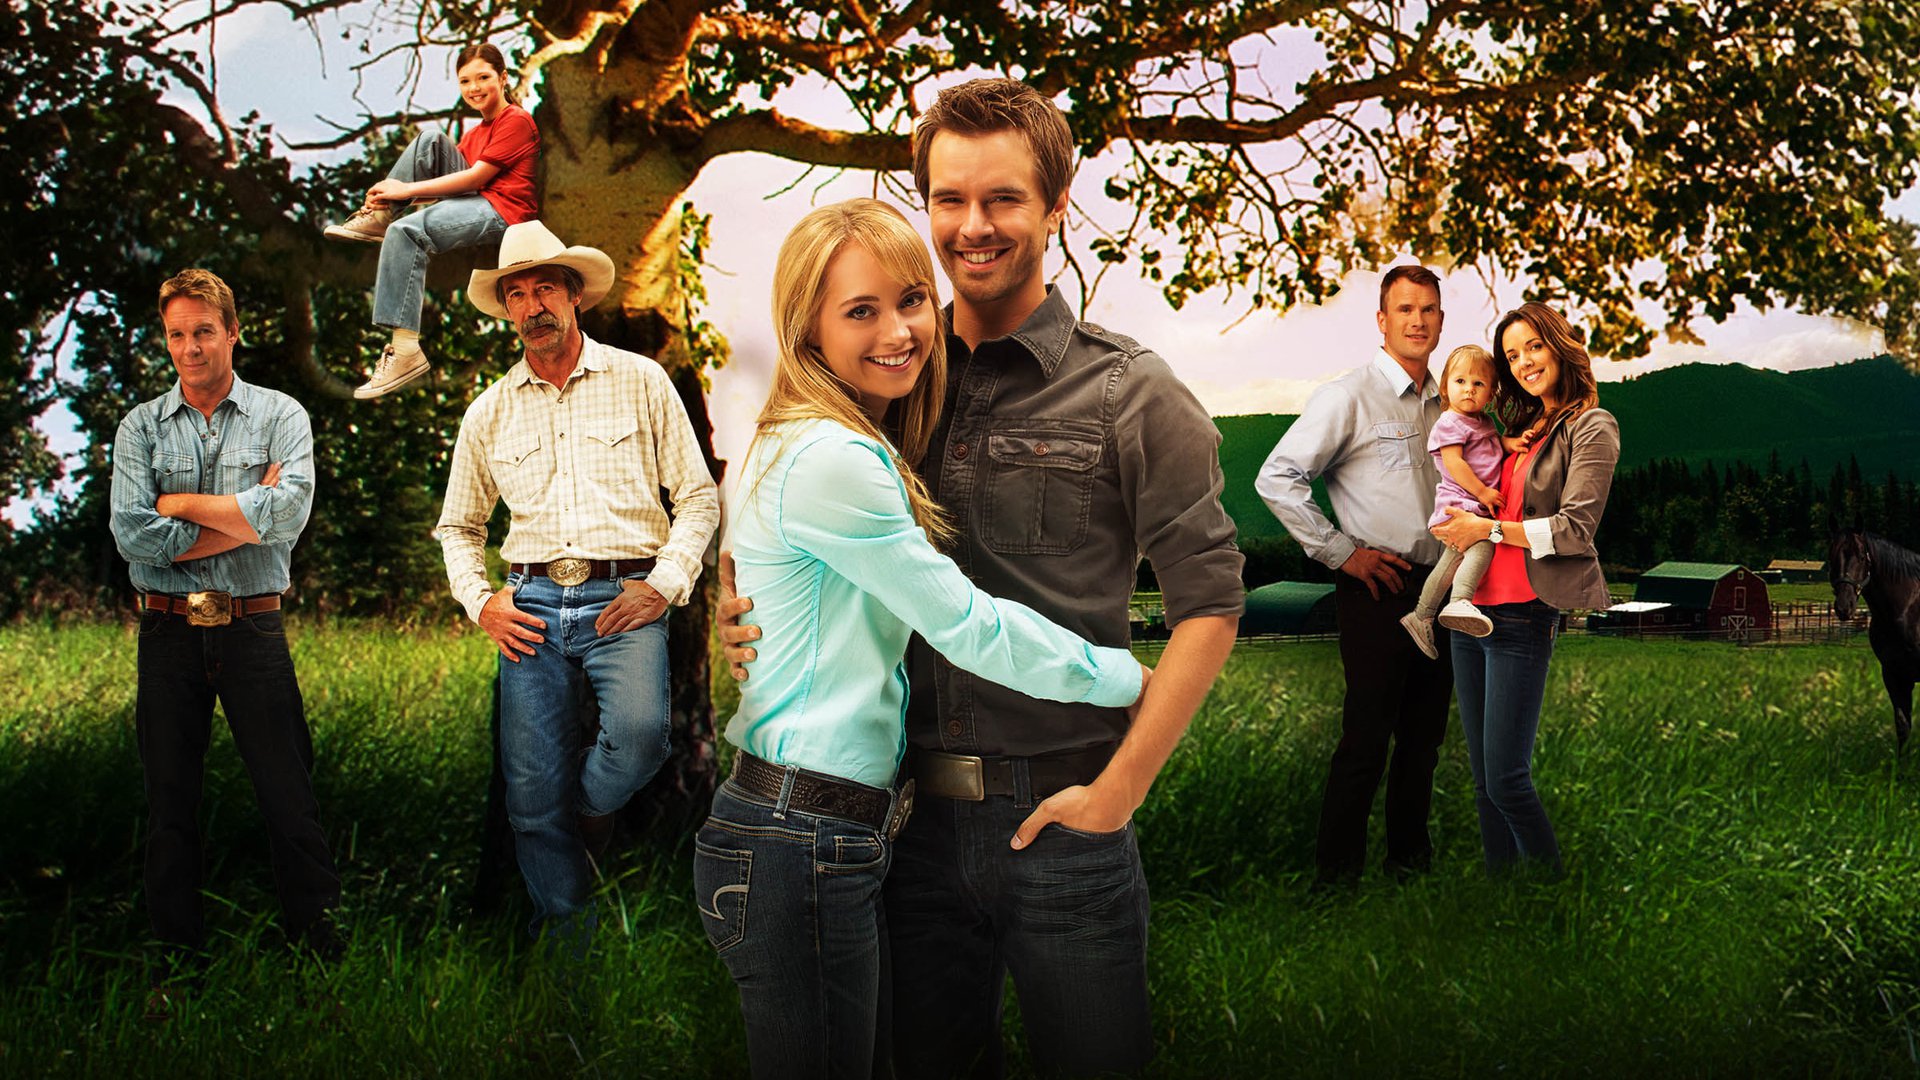 Heartland HD Wallpapers and Backgrounds. 